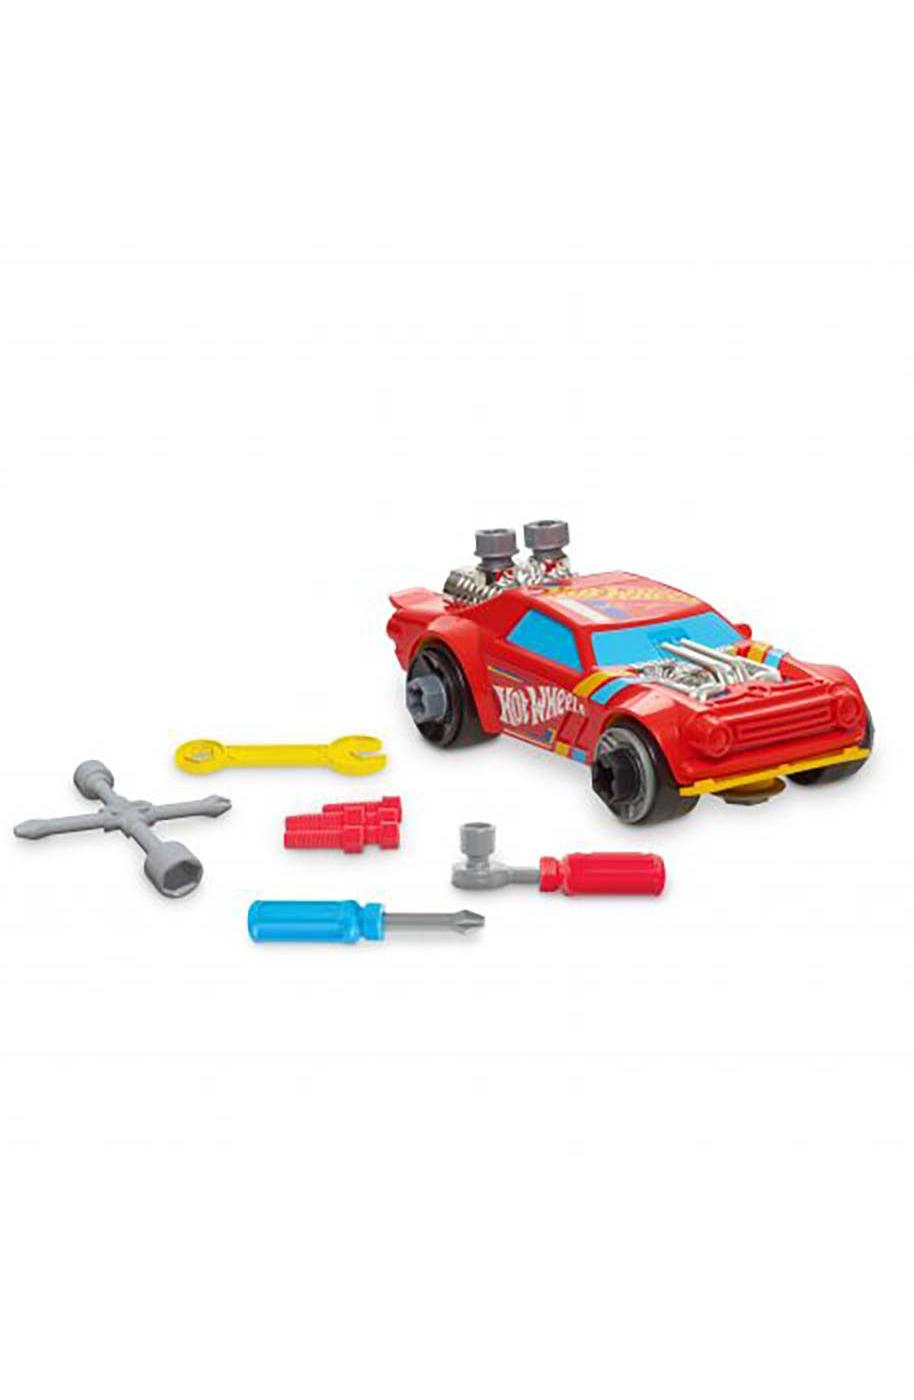 Hot Wheels Ready To Race Car Builder, Assorted; image 4 of 5